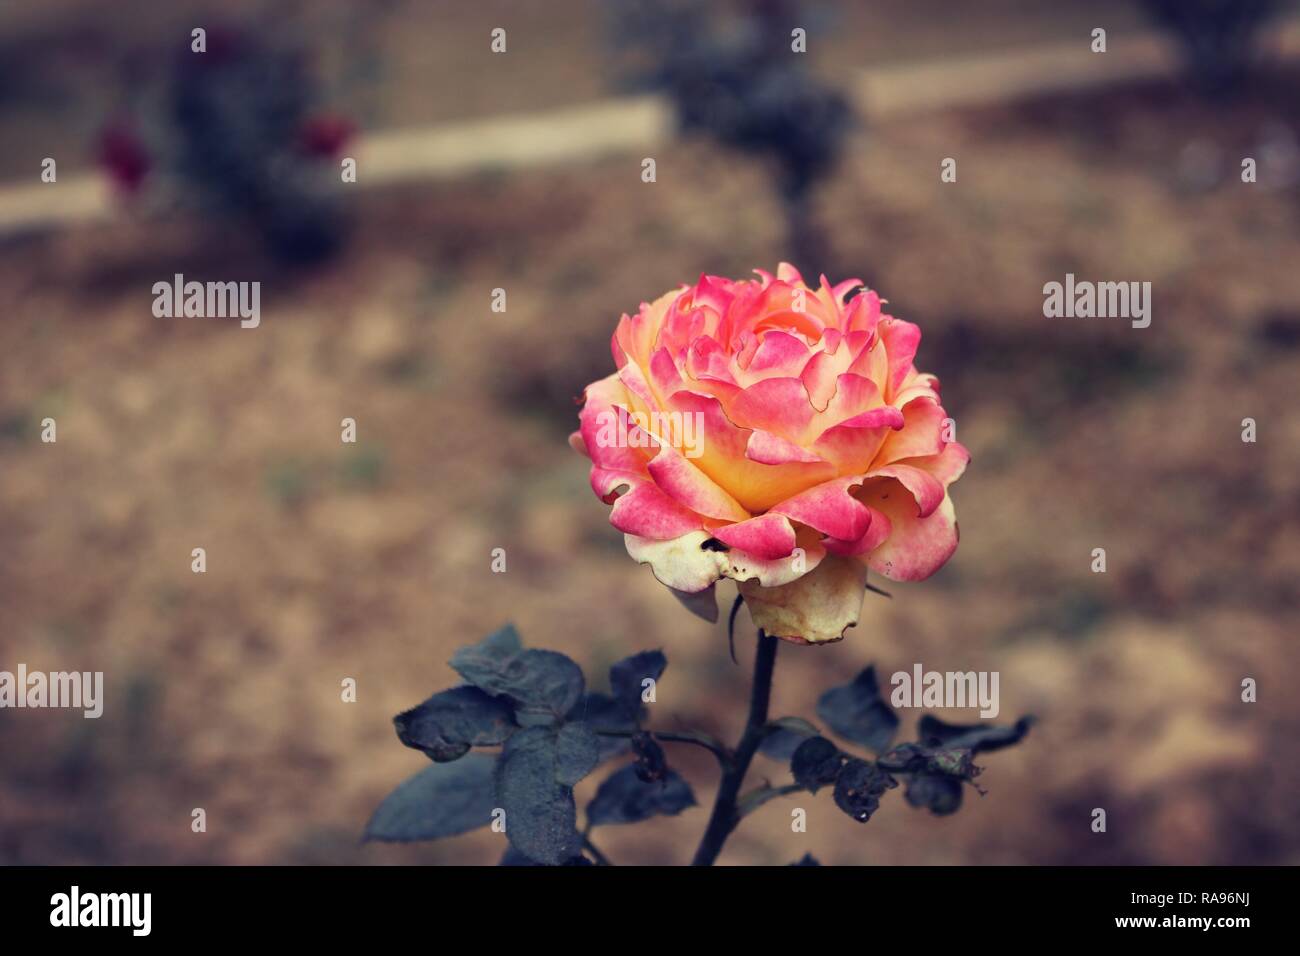 A Beautiful red yellow rose Stock Photo